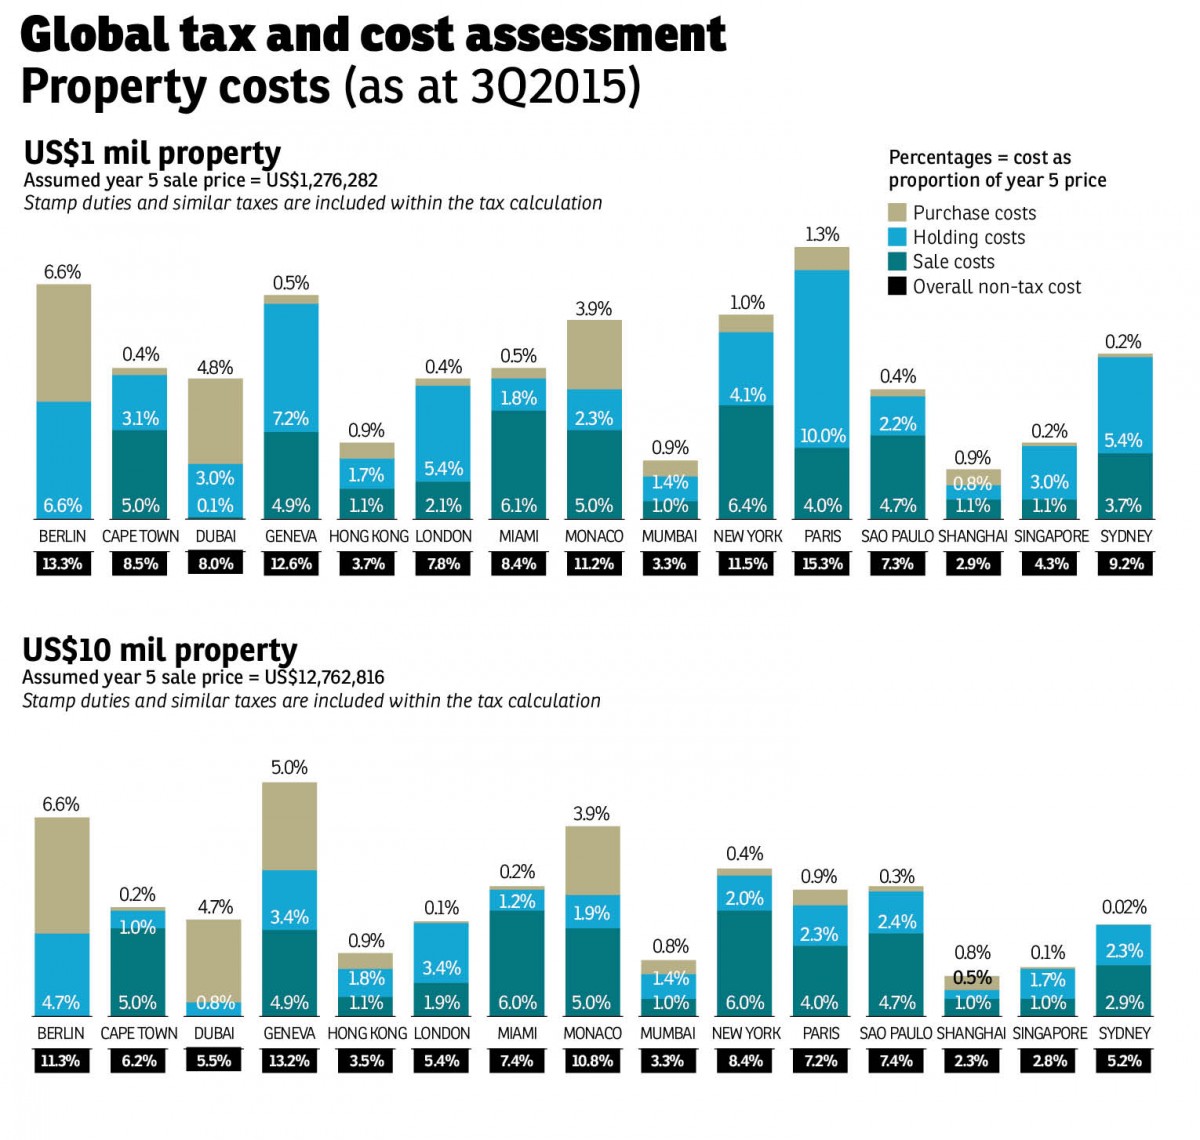 Global tax and cost assessment